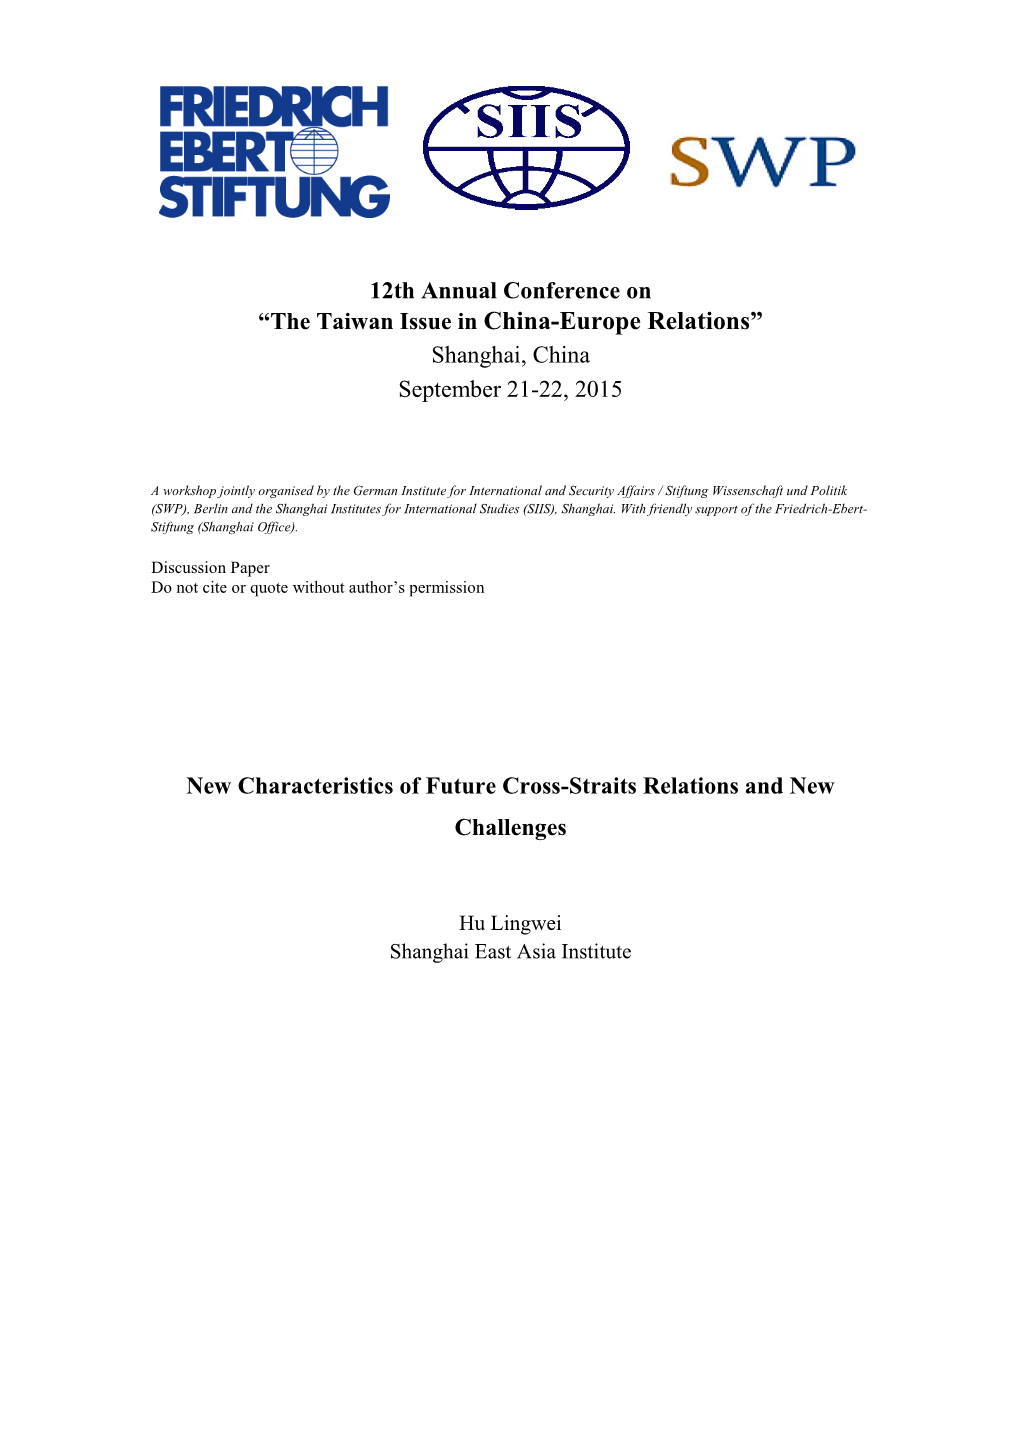 The Taiwan Issue in China-Europe Relations” Shanghai, China September 21-22, 2015